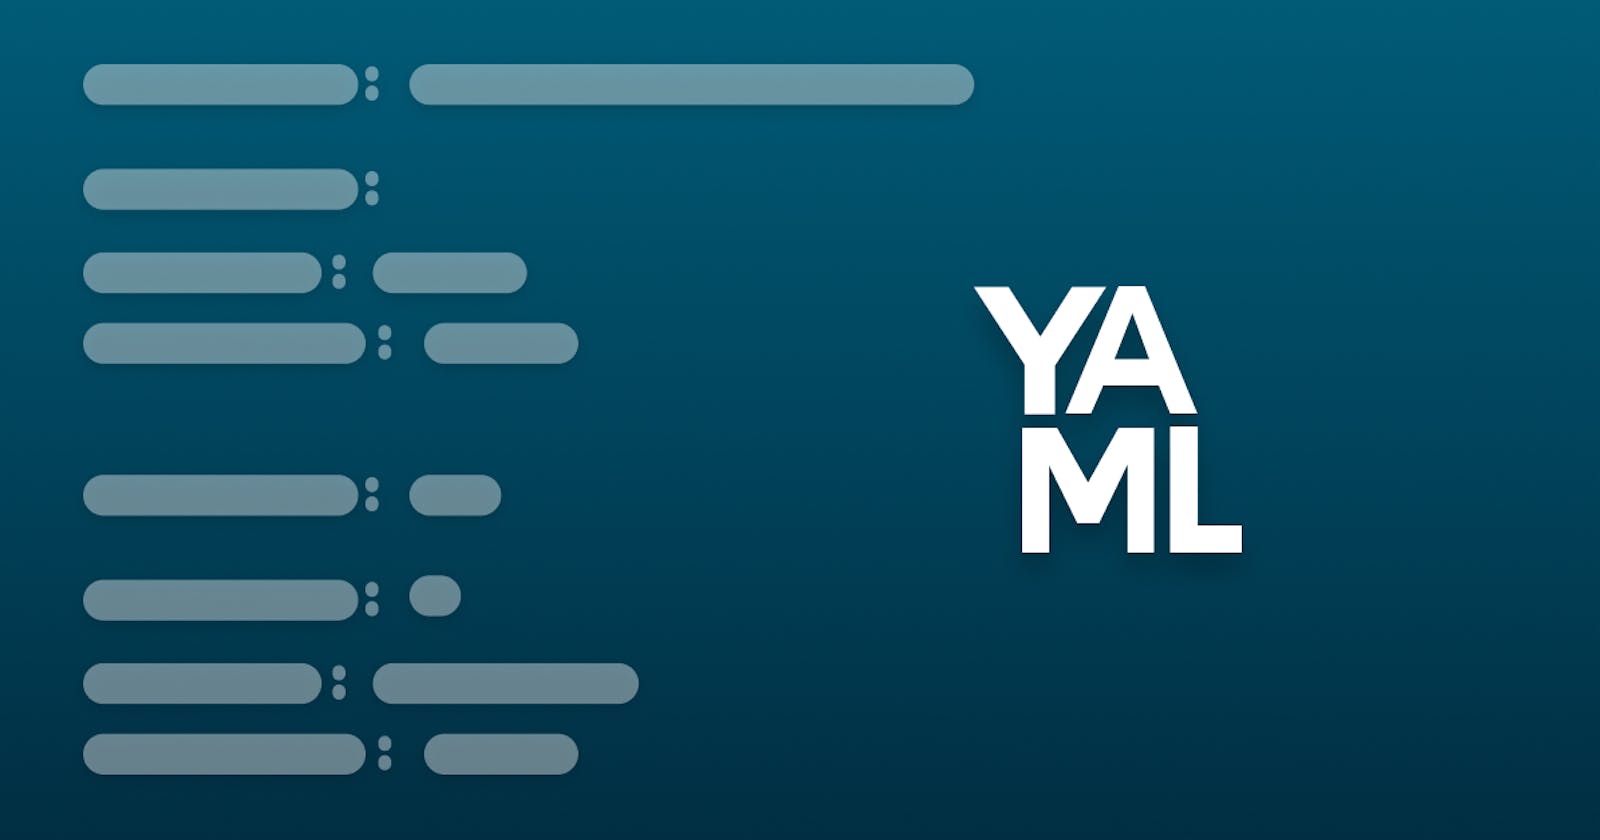 Getting Started With YAML